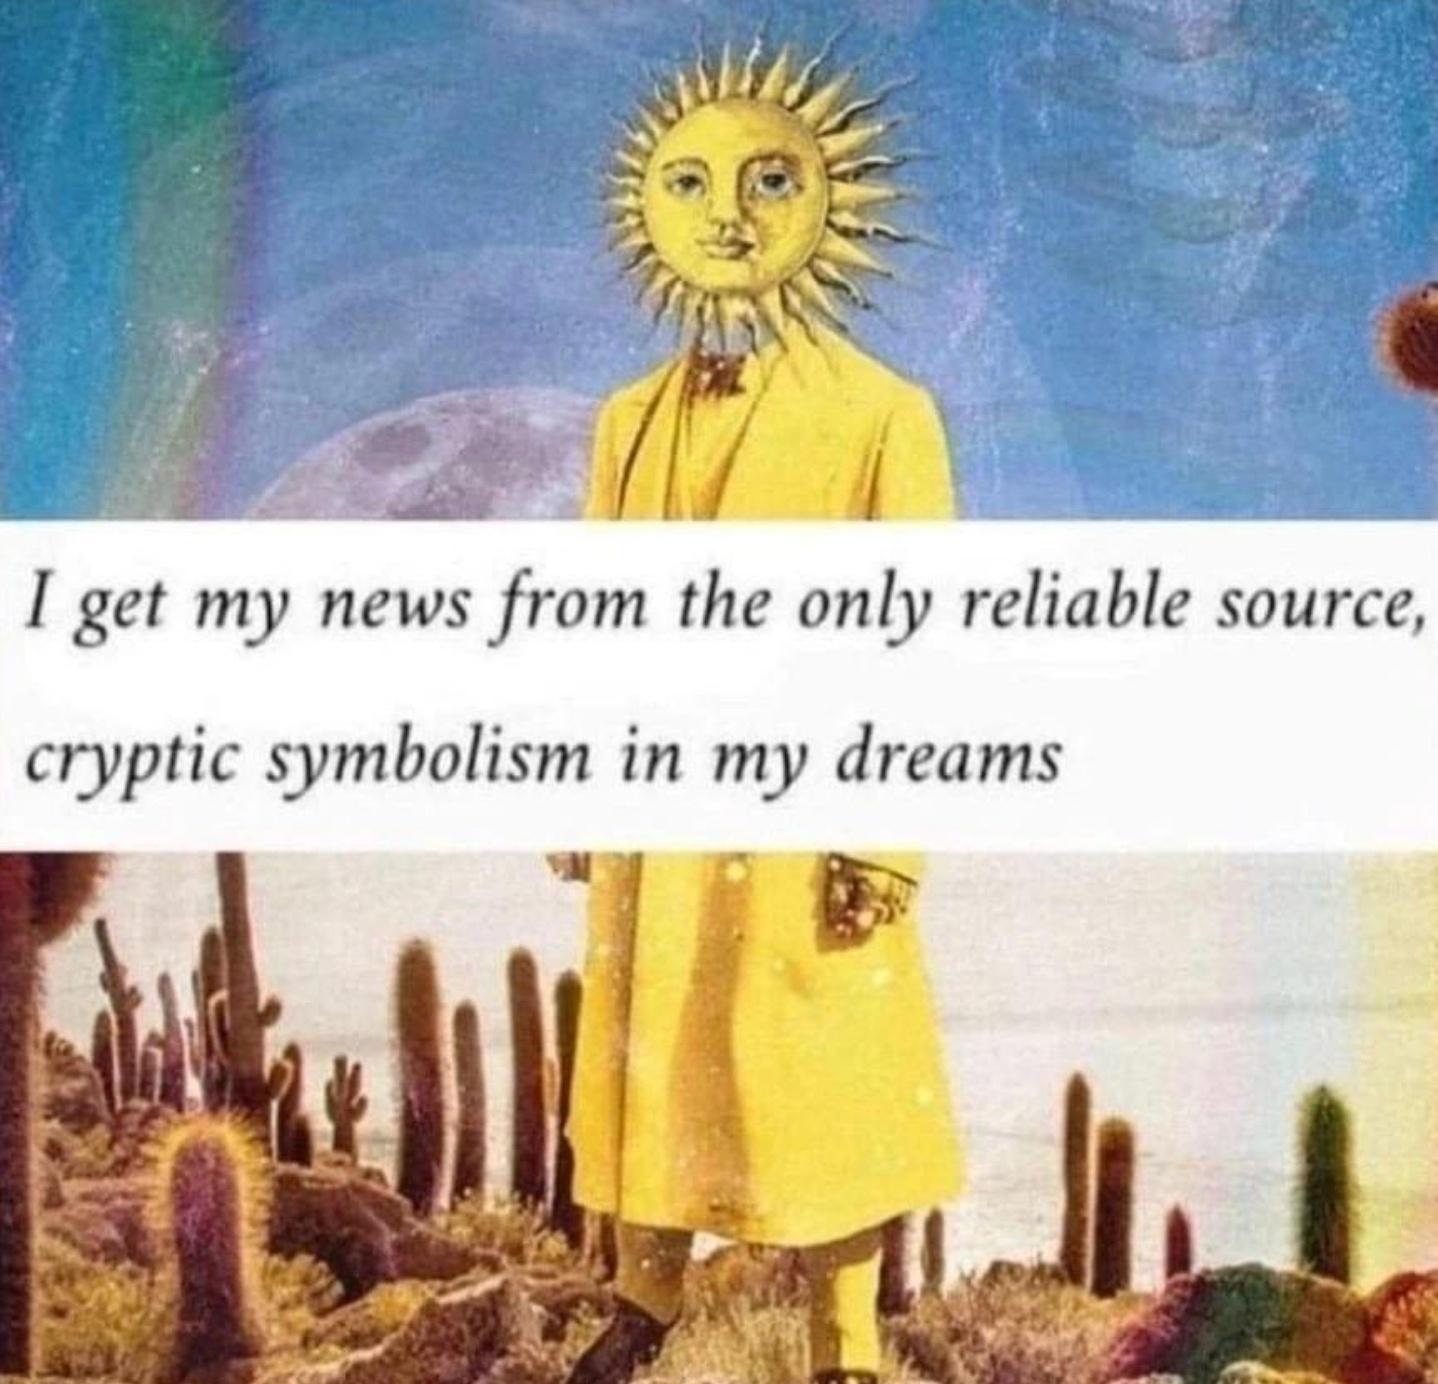 dank memes - get my news from the only reliable source cryptic symbolism in my dreams - I get my news from the only reliable source, cryptic symbolism in my dreams